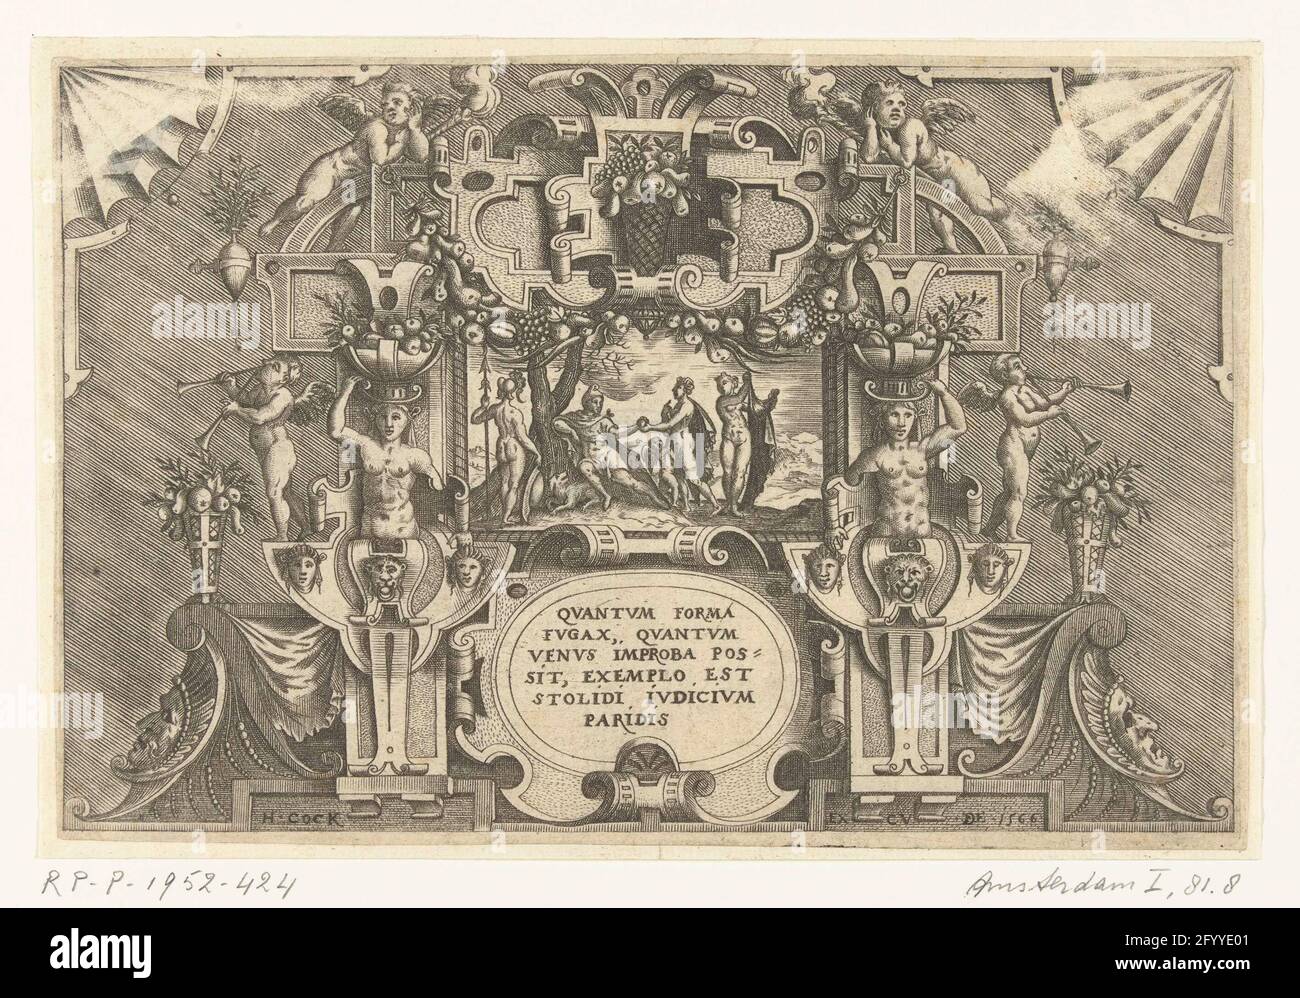 Judgment of Paris; QVANTVM FORMA / FVGAX, QVANTVM / VENVS IMPROBA POS (...); Comperimentorum quod vocant plywood genus .... Paris judgment in a frame of rollerwork with female hermen, mascarons, putti and garlands. Leaf from series consisting of a title page and 15 of the 16 sheets with cartouches with biblical and mythological performances in a frame of rollerwork and grotesken. Stock Photo